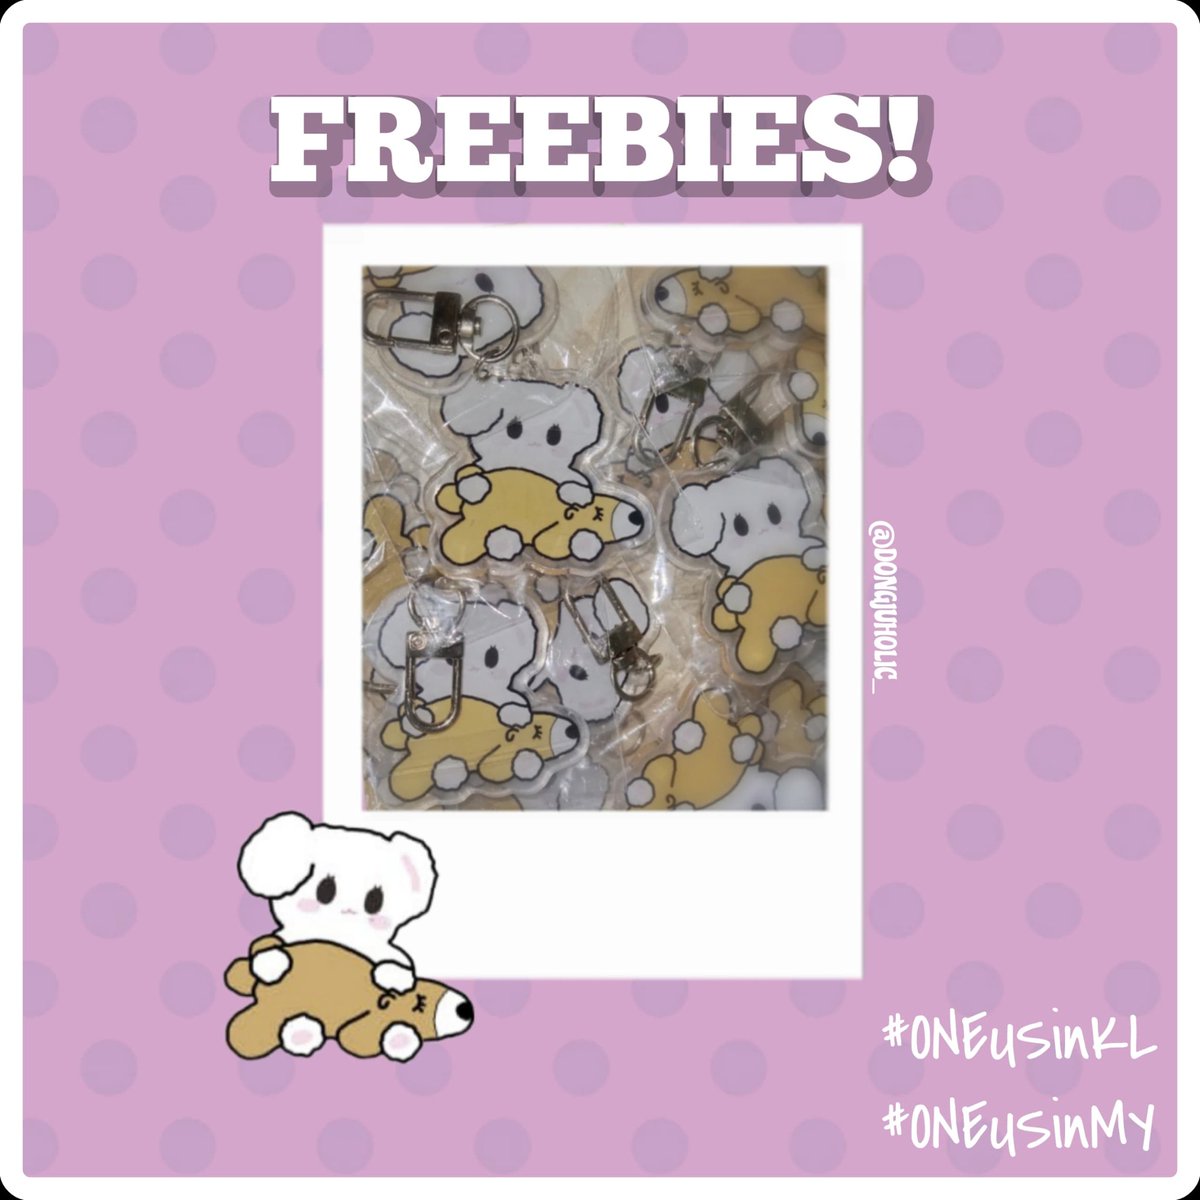 💛 FREEBIES for LDV in KL 💙

i have around 20+ pcs of this lil juju keyring, do adopt one and bring him home, hope y'all like it 🥹

✿ come and say hi to me!!
✿ ZEPP KL, exact location TBA

will share my fit later so it'll be easier to find me!

see u!!

#ONEUSinMY #ONEUSinKL